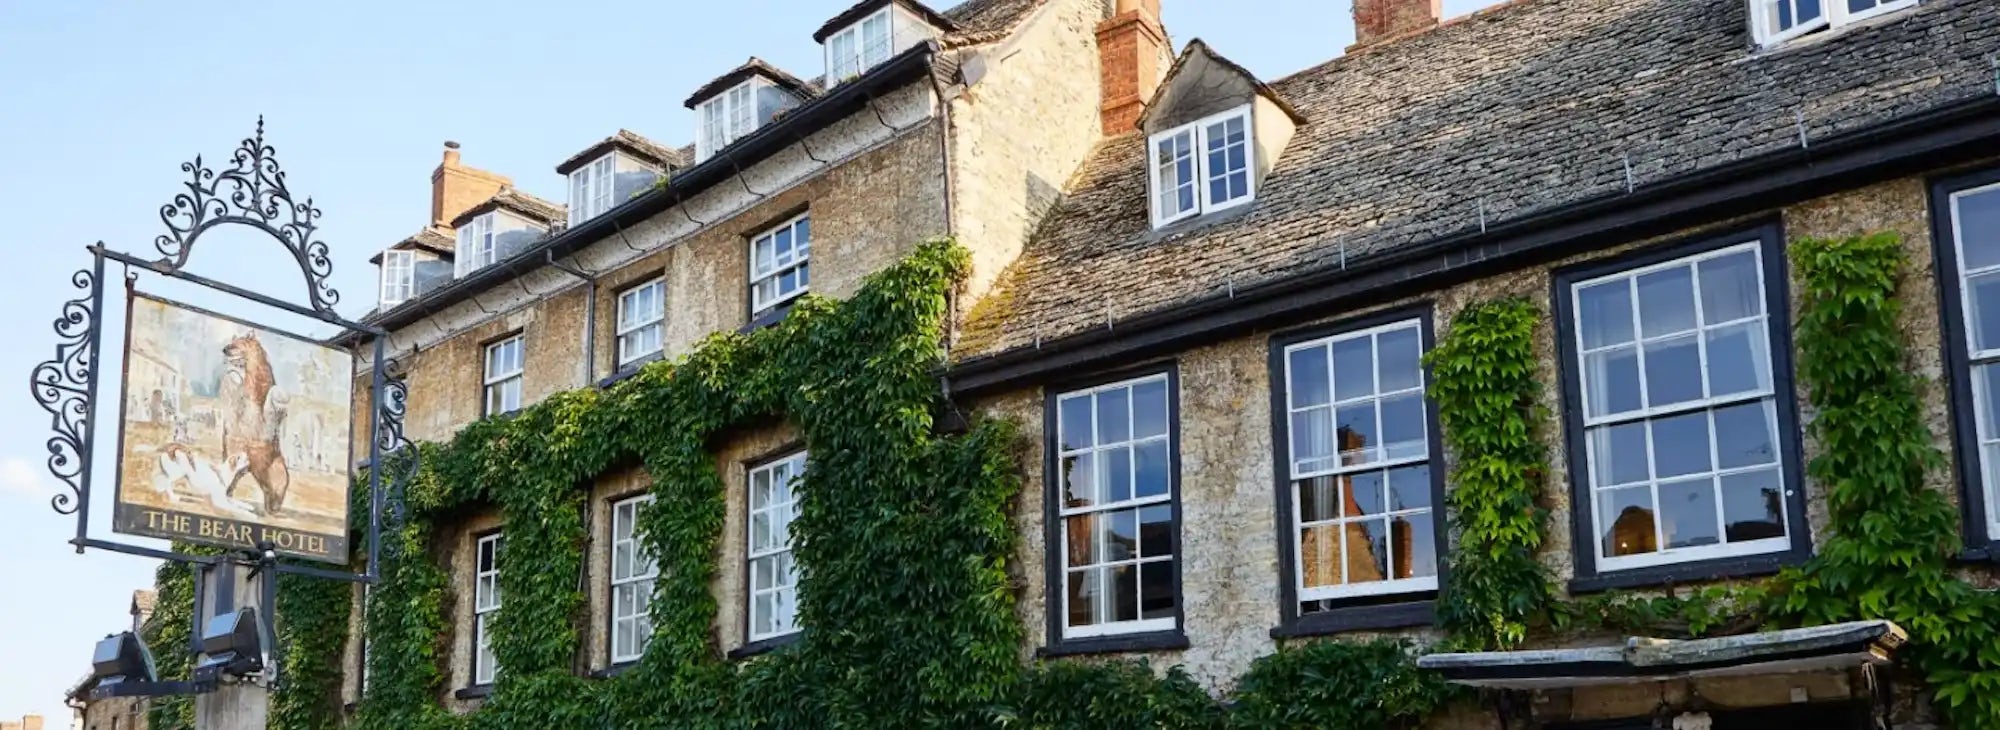 Bear Hotel in Oxfordshire